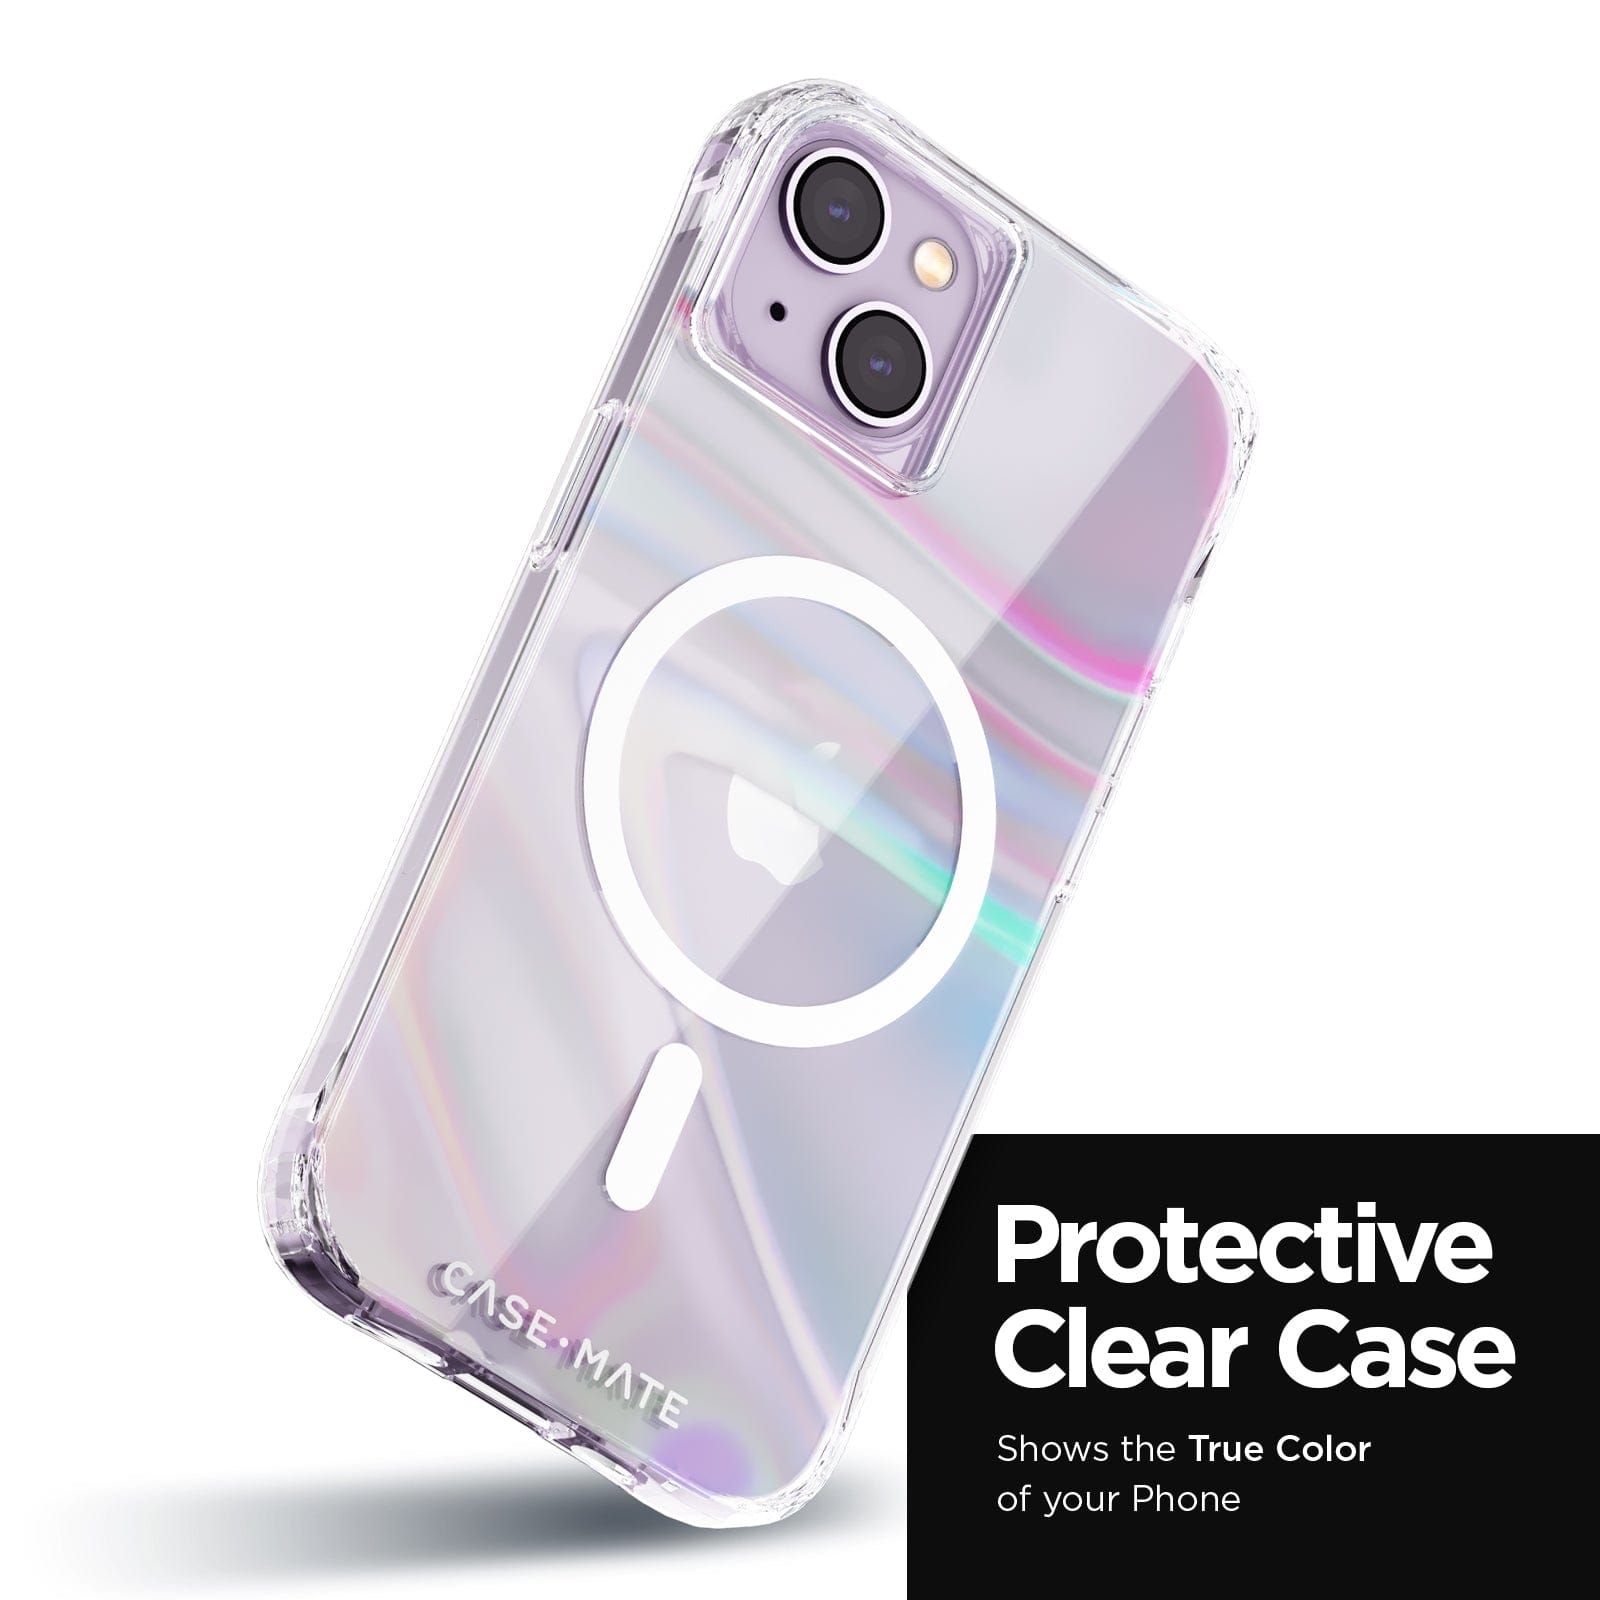 PROTECTIVE CLEAR CASE. SHOWS THE TRUE COLOR OF YOUR PHONE.